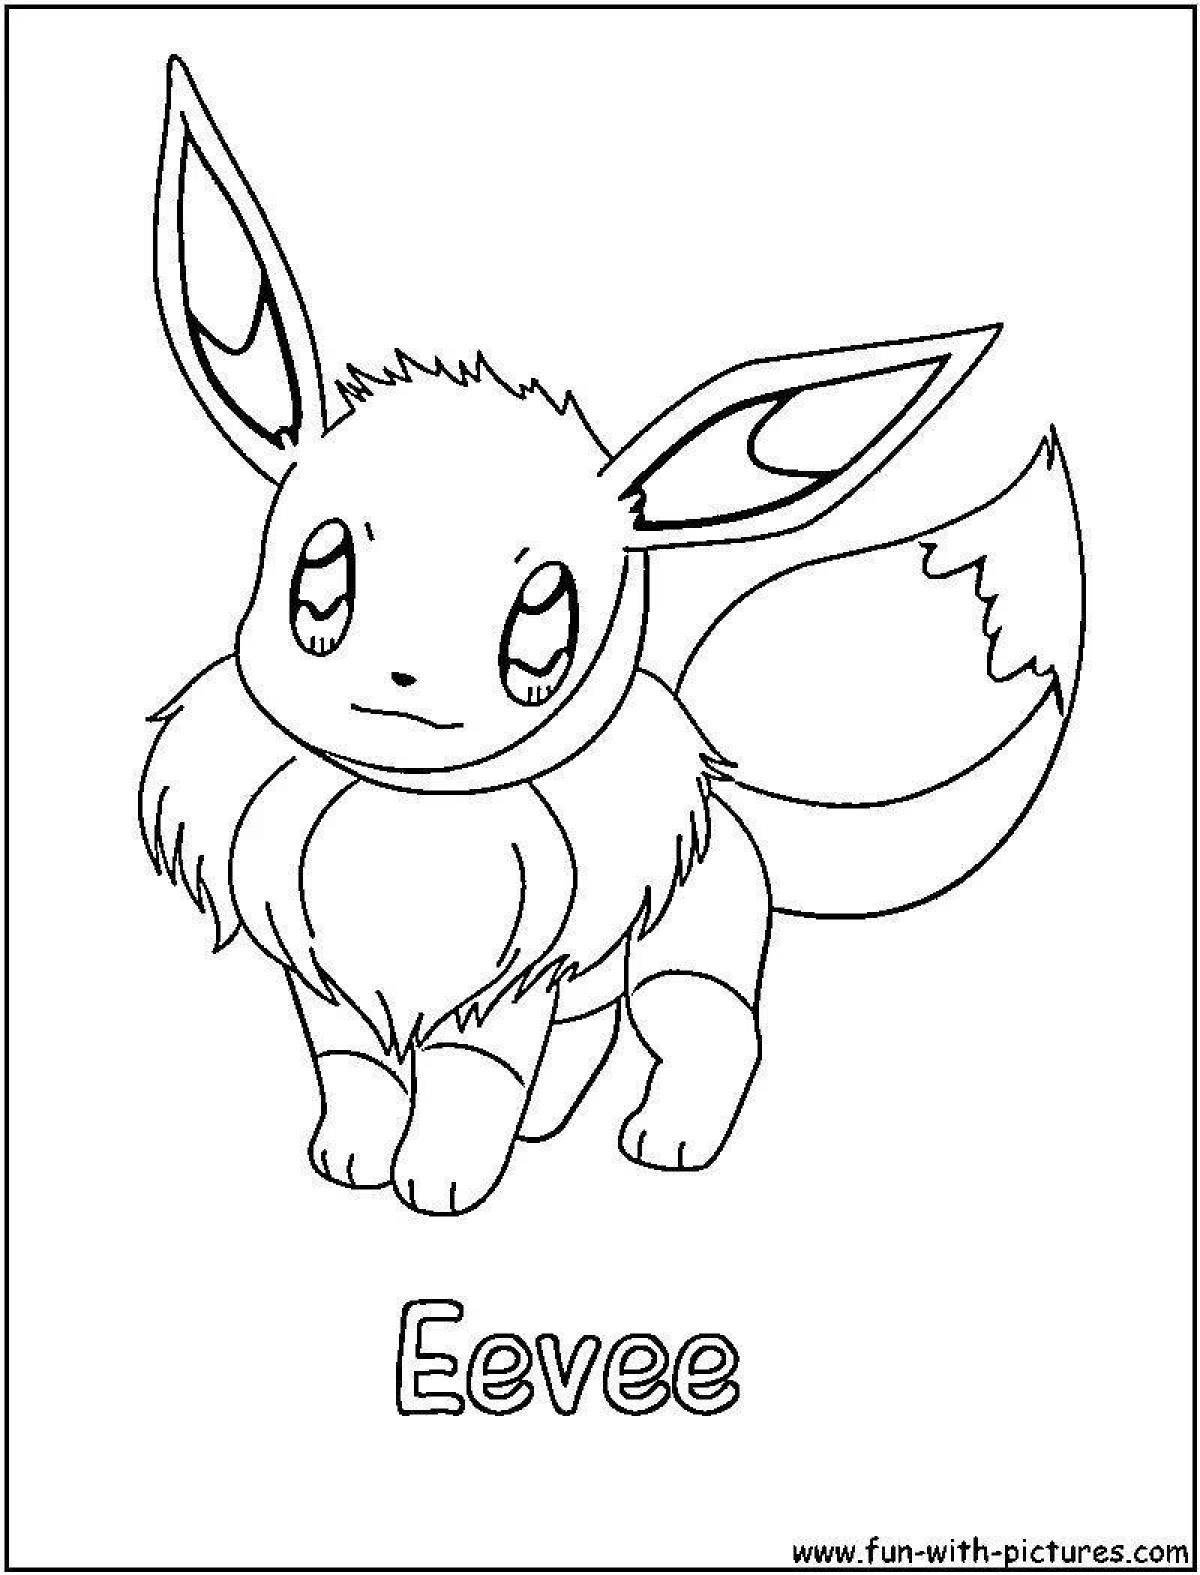 Eevee and Pikachu bright coloring